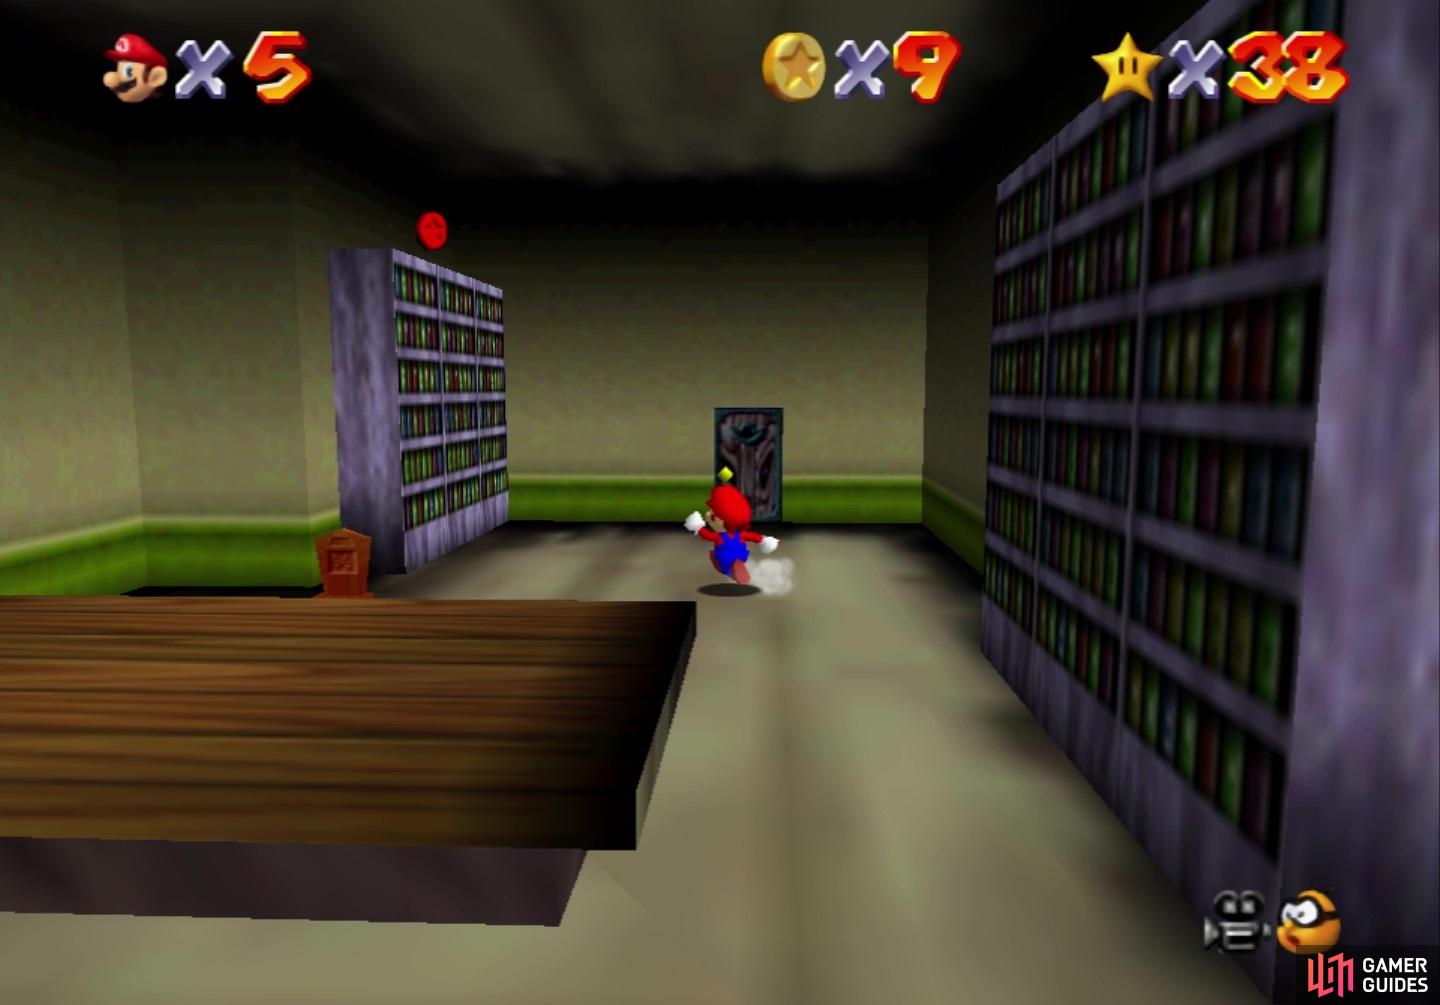 In the same room as the second coin, the third is on the other bookshelf